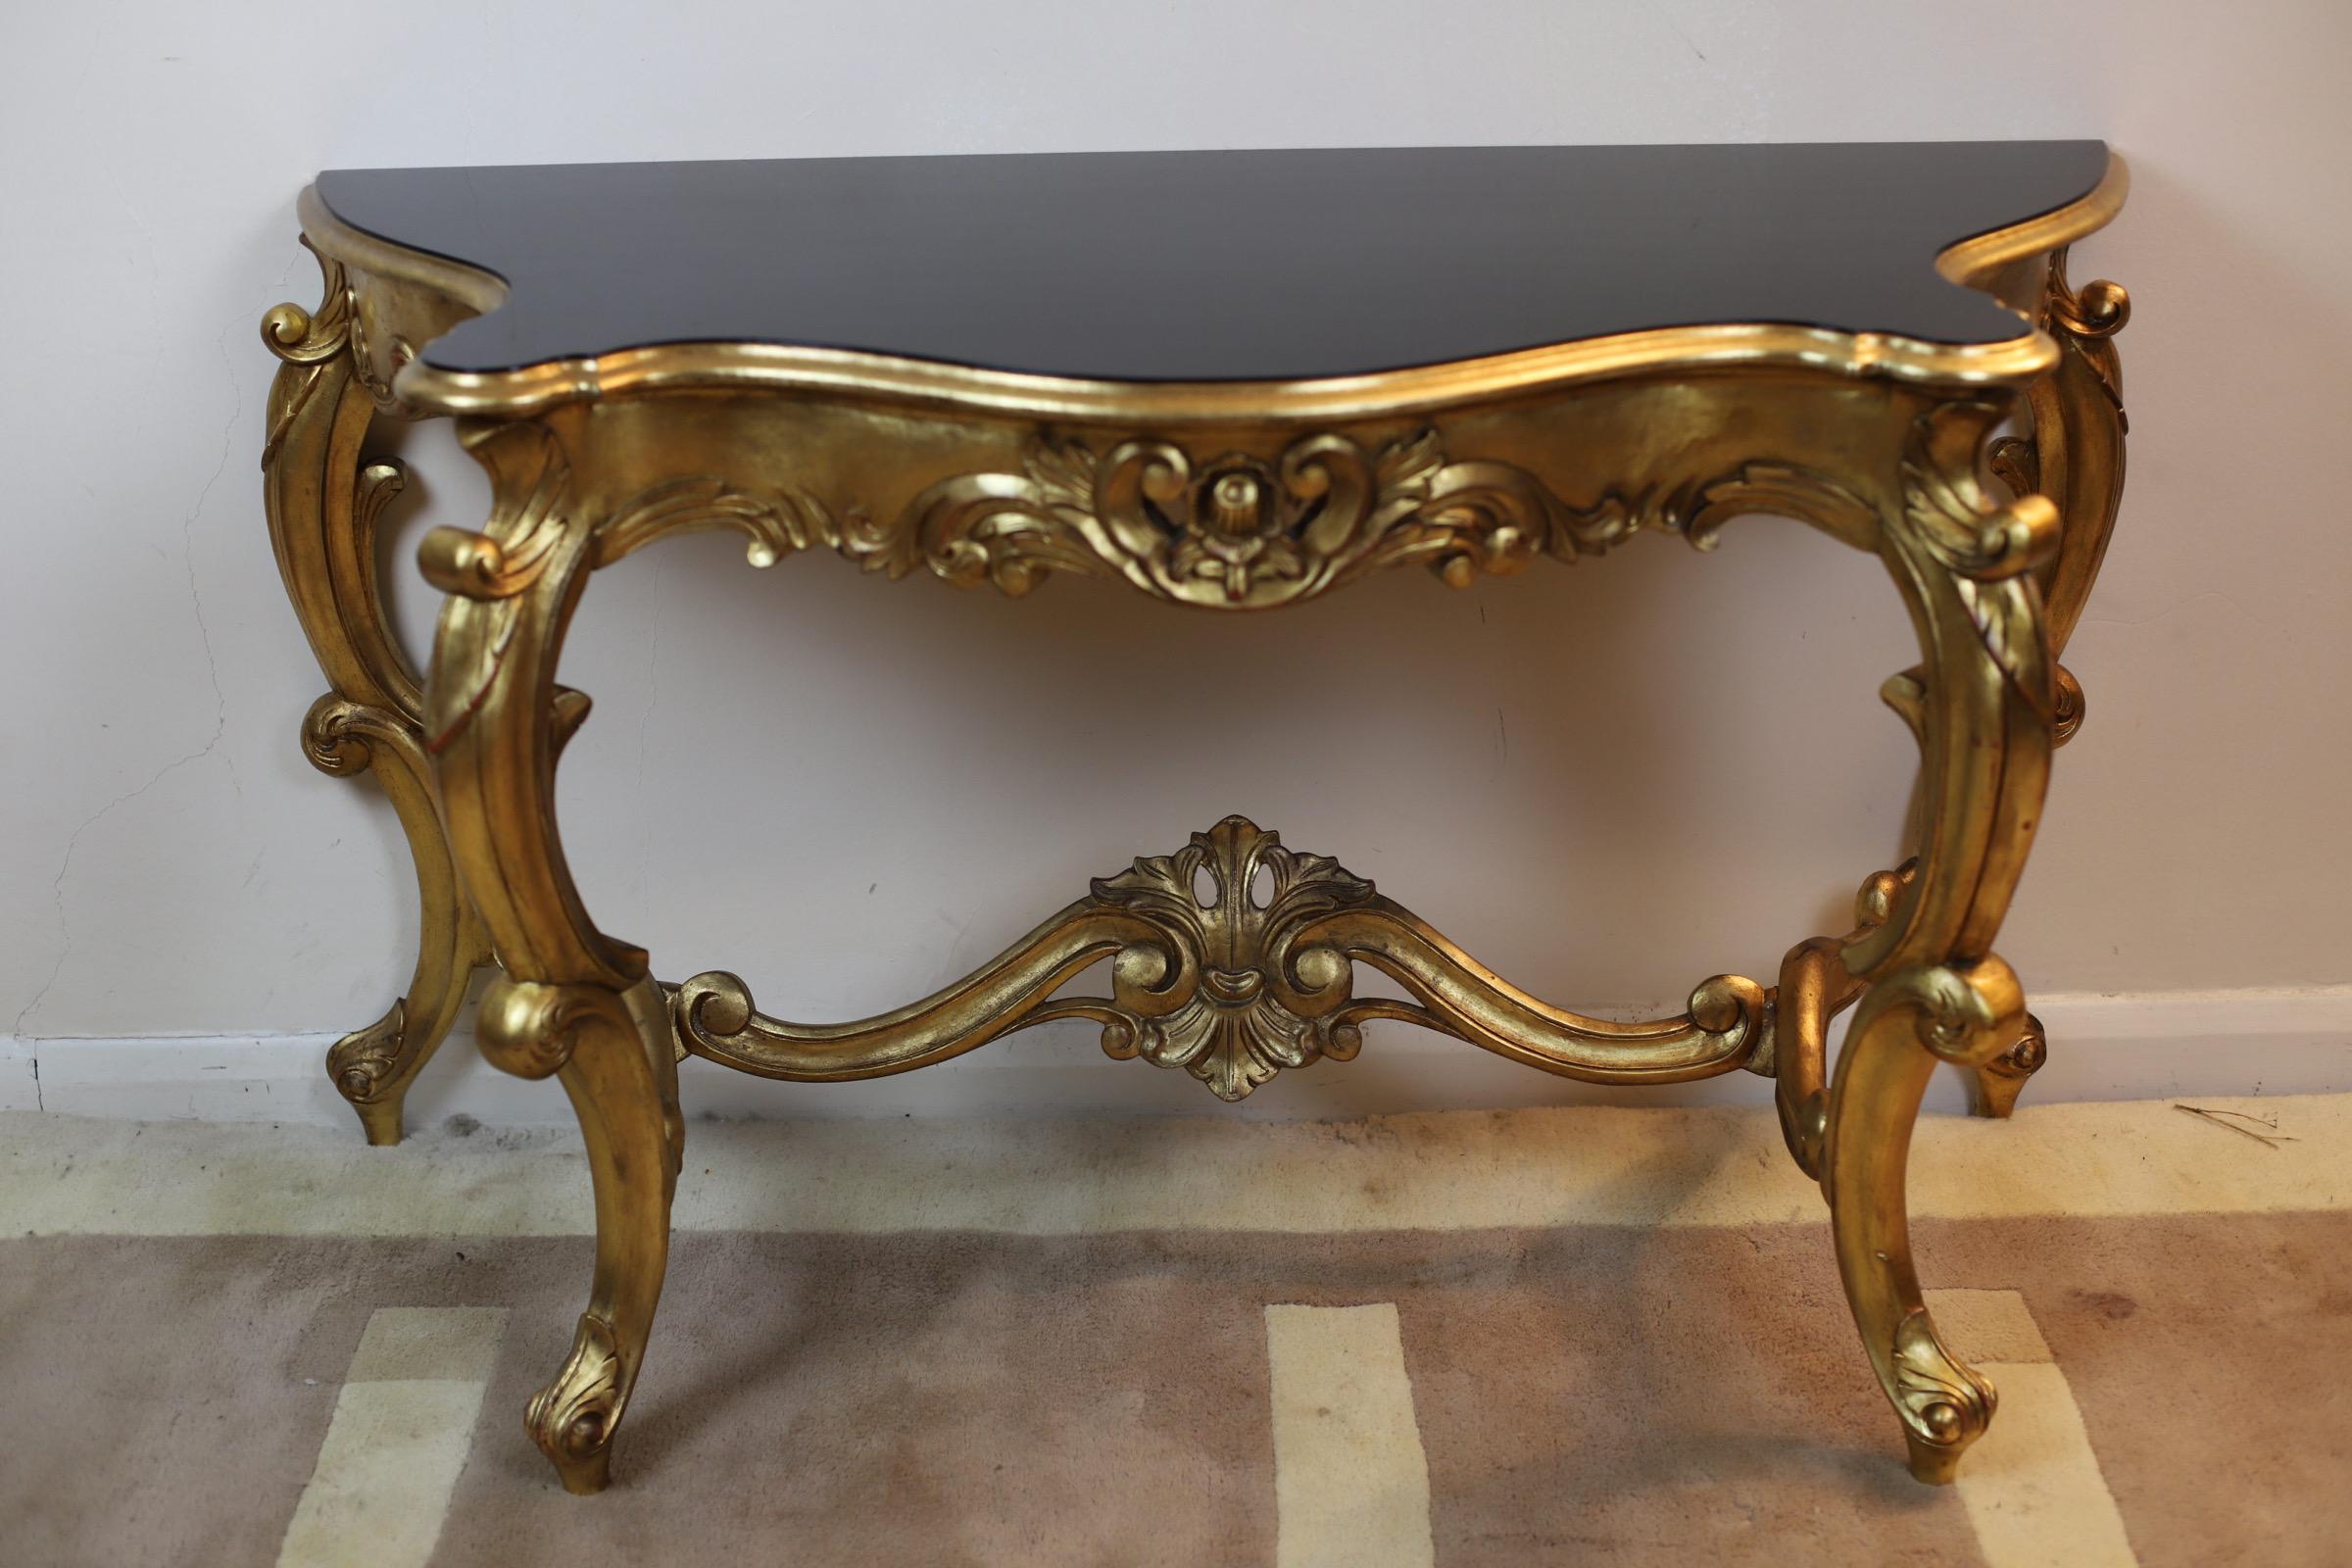 French Gilt Console Table - Louis XVI Carved Furniture.
Antique style gilt side table having ebonised top with decorated frieze, raised on C-scroll and cabriole supports with stretchers.

Don't hesitate to contact me if you have any